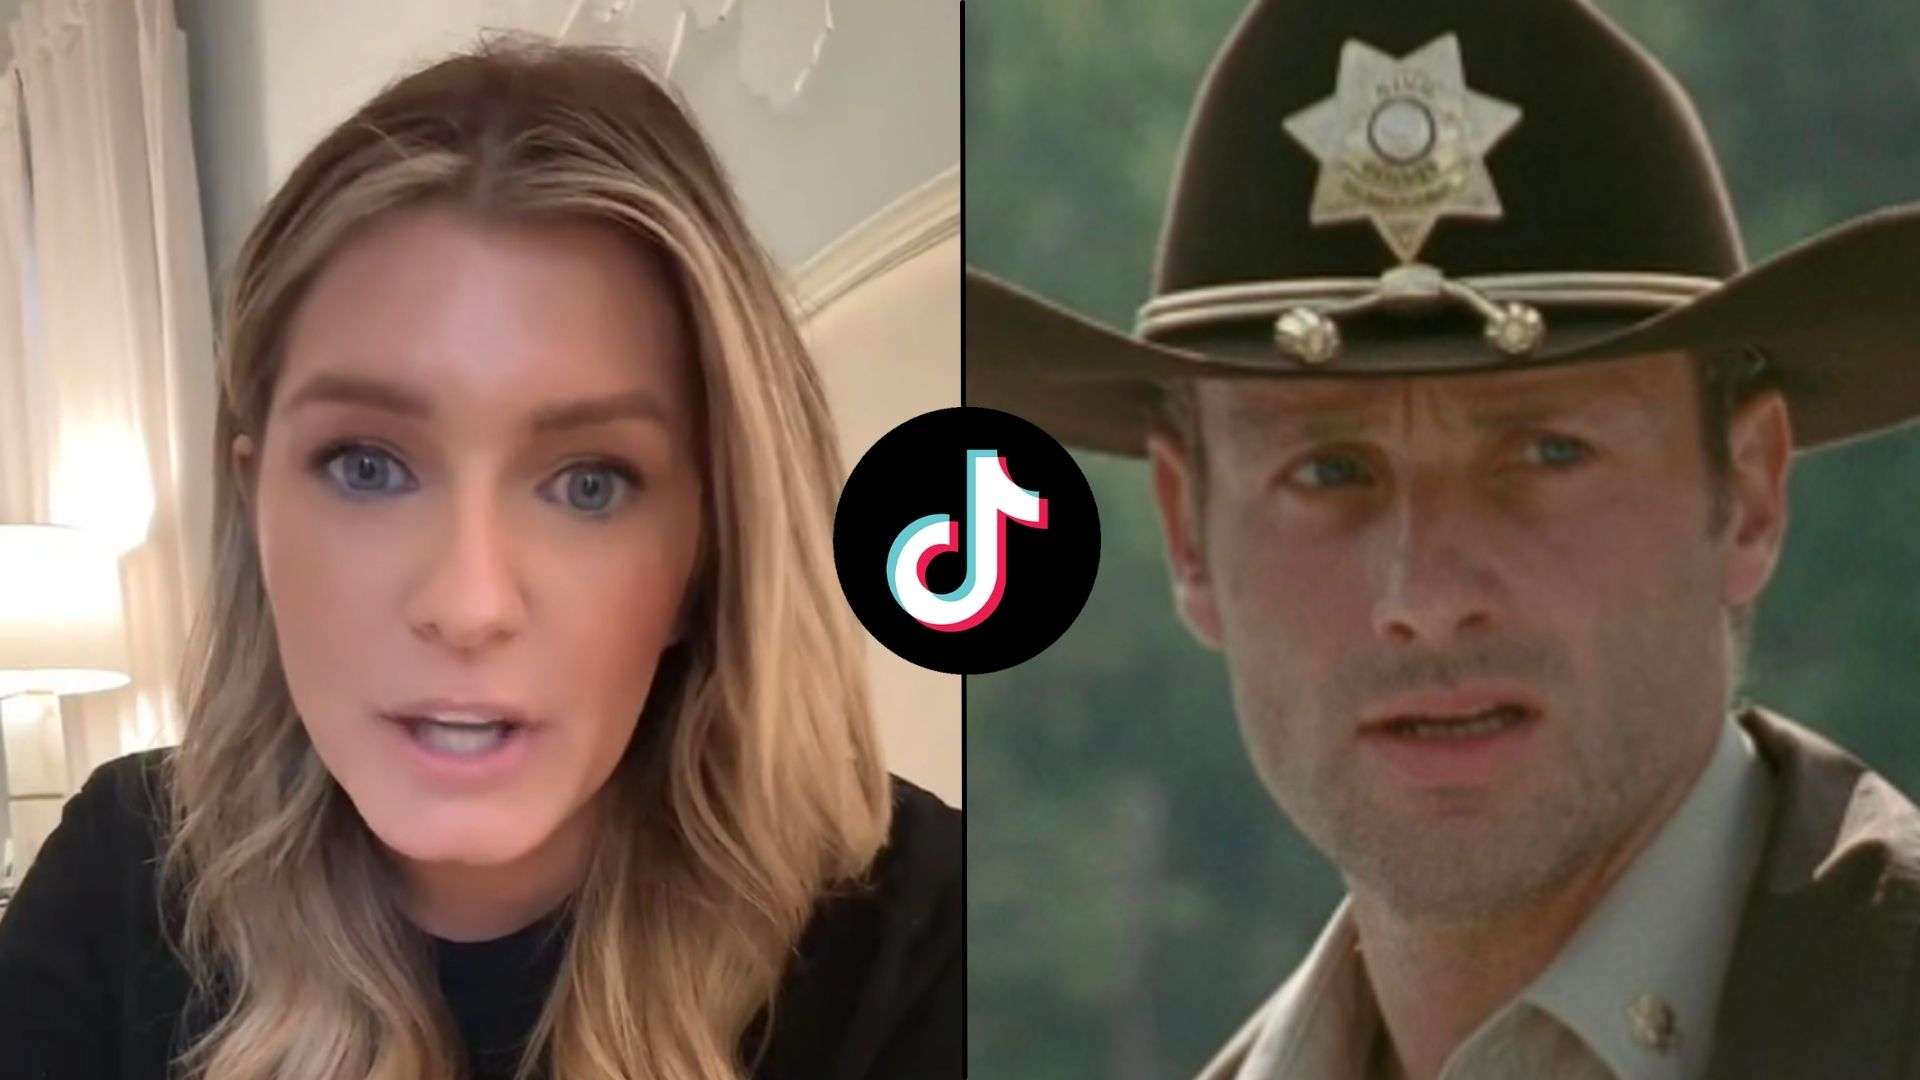 Woman talking to camera side by side with Rick from Walking Dead and TikTok logo